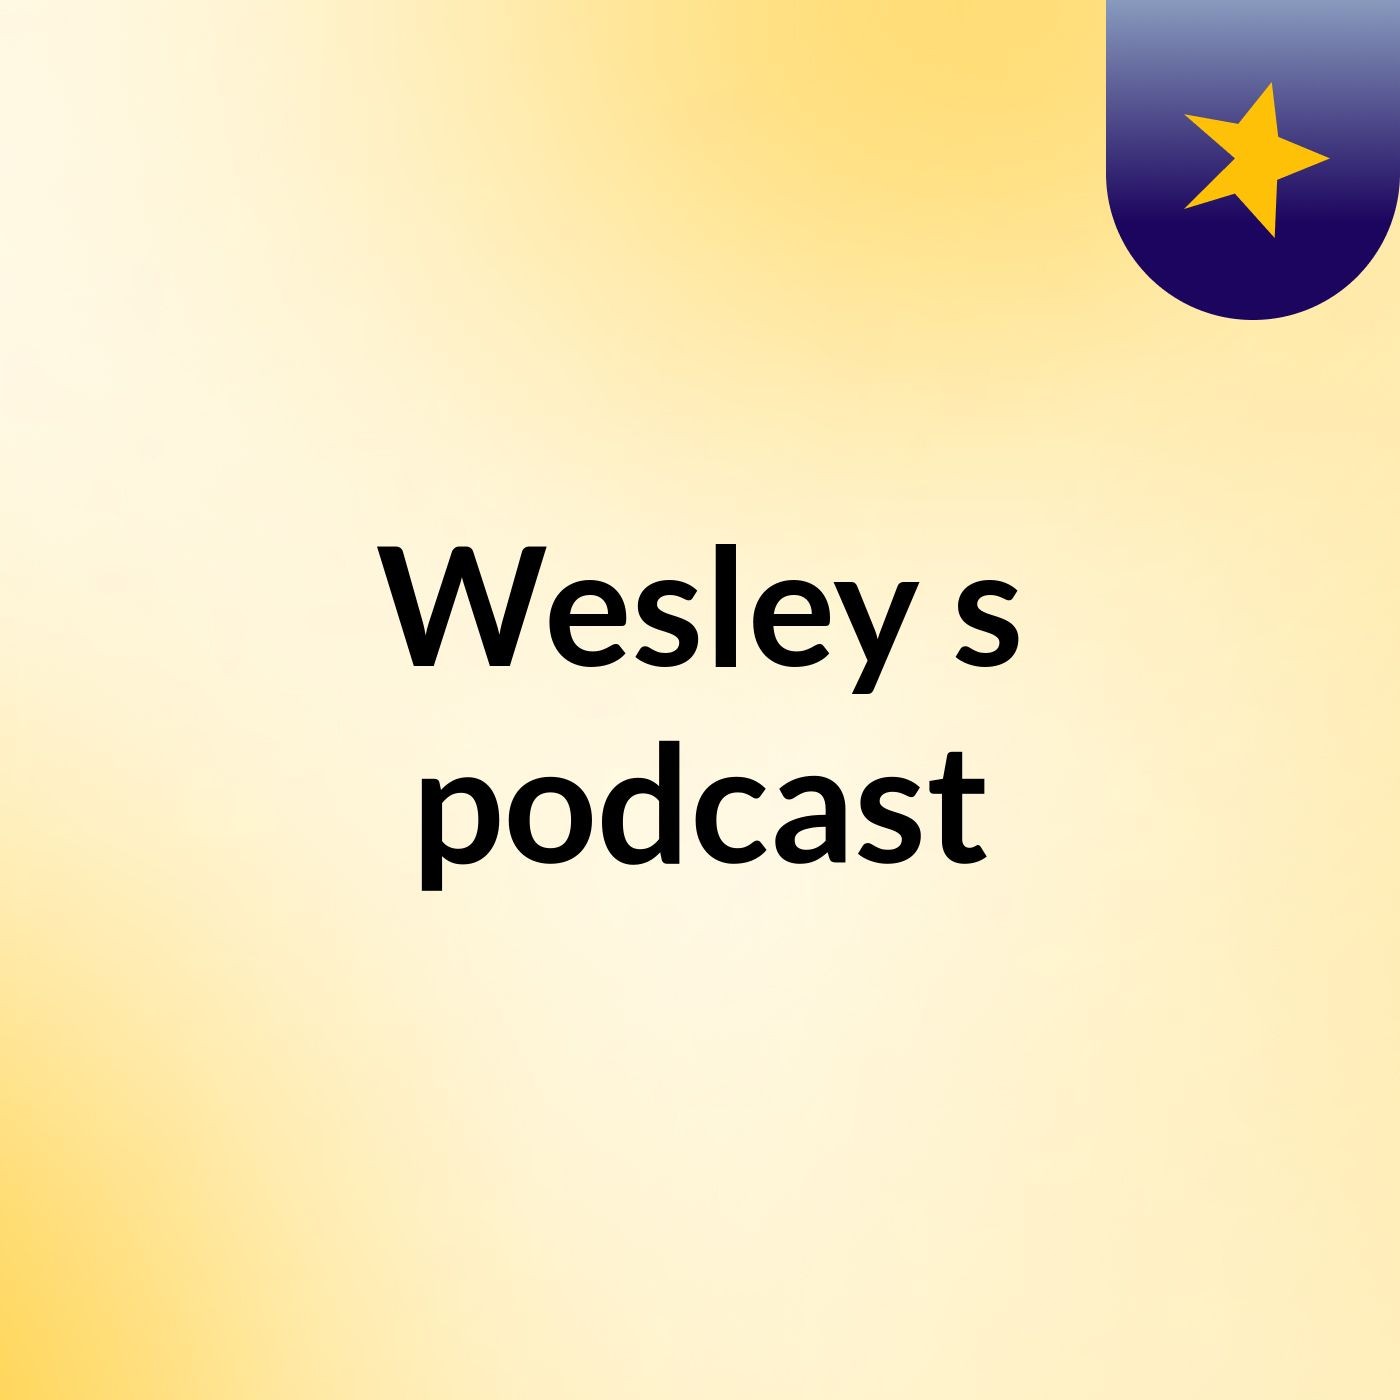 Wesley's podcast